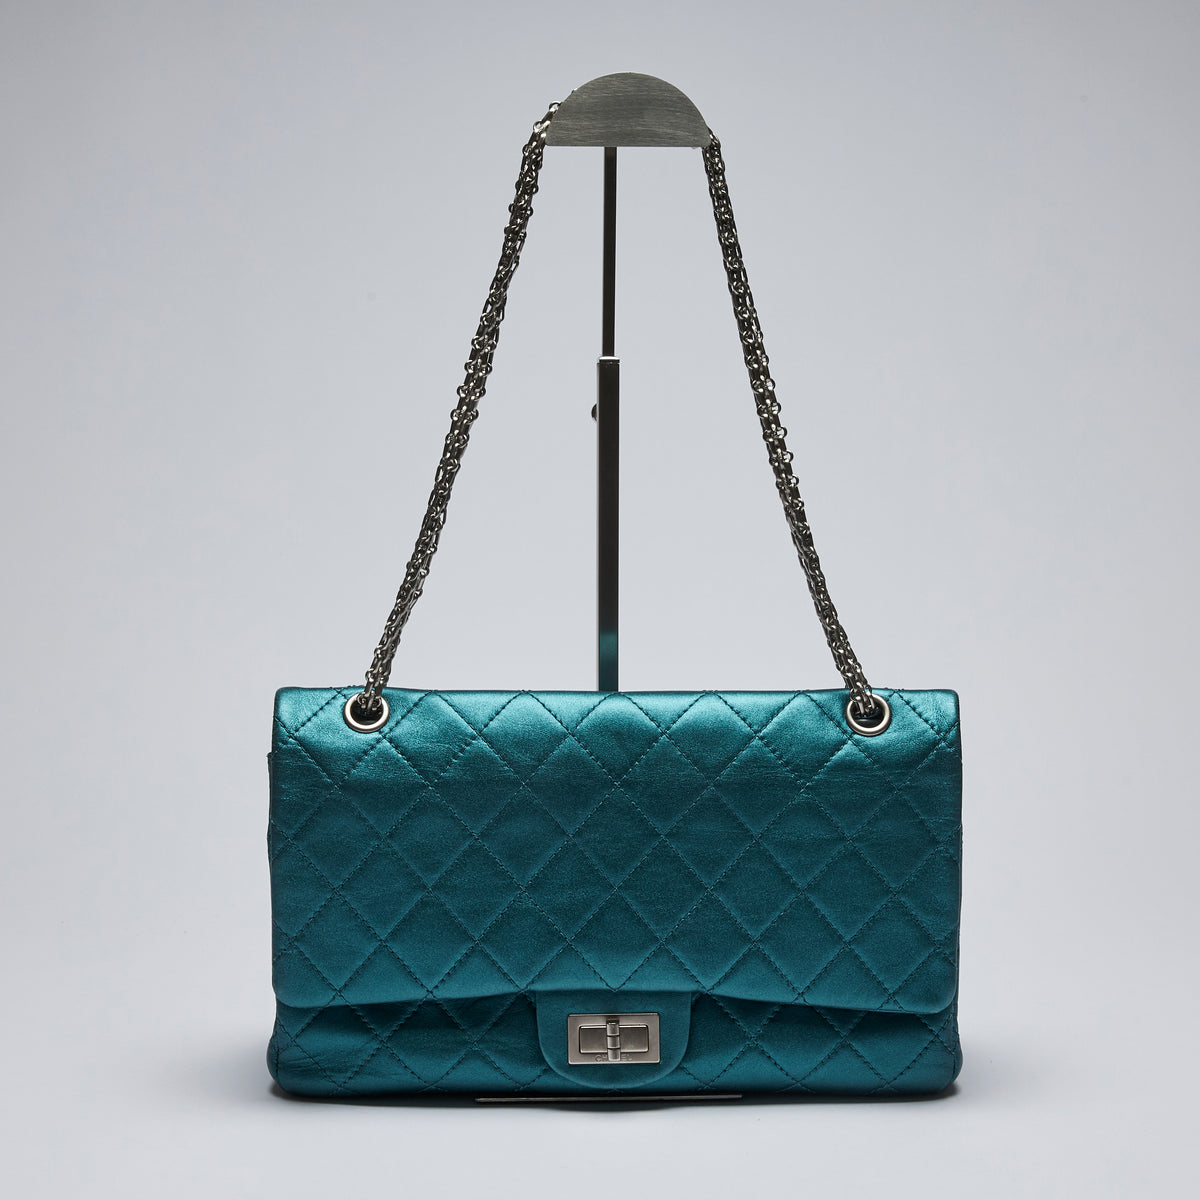 Excellent Pre-Loved Teal Metallic Leather Large Double Flap Bag with Ruthenium Bijou Chain and Turn Lock.(front)